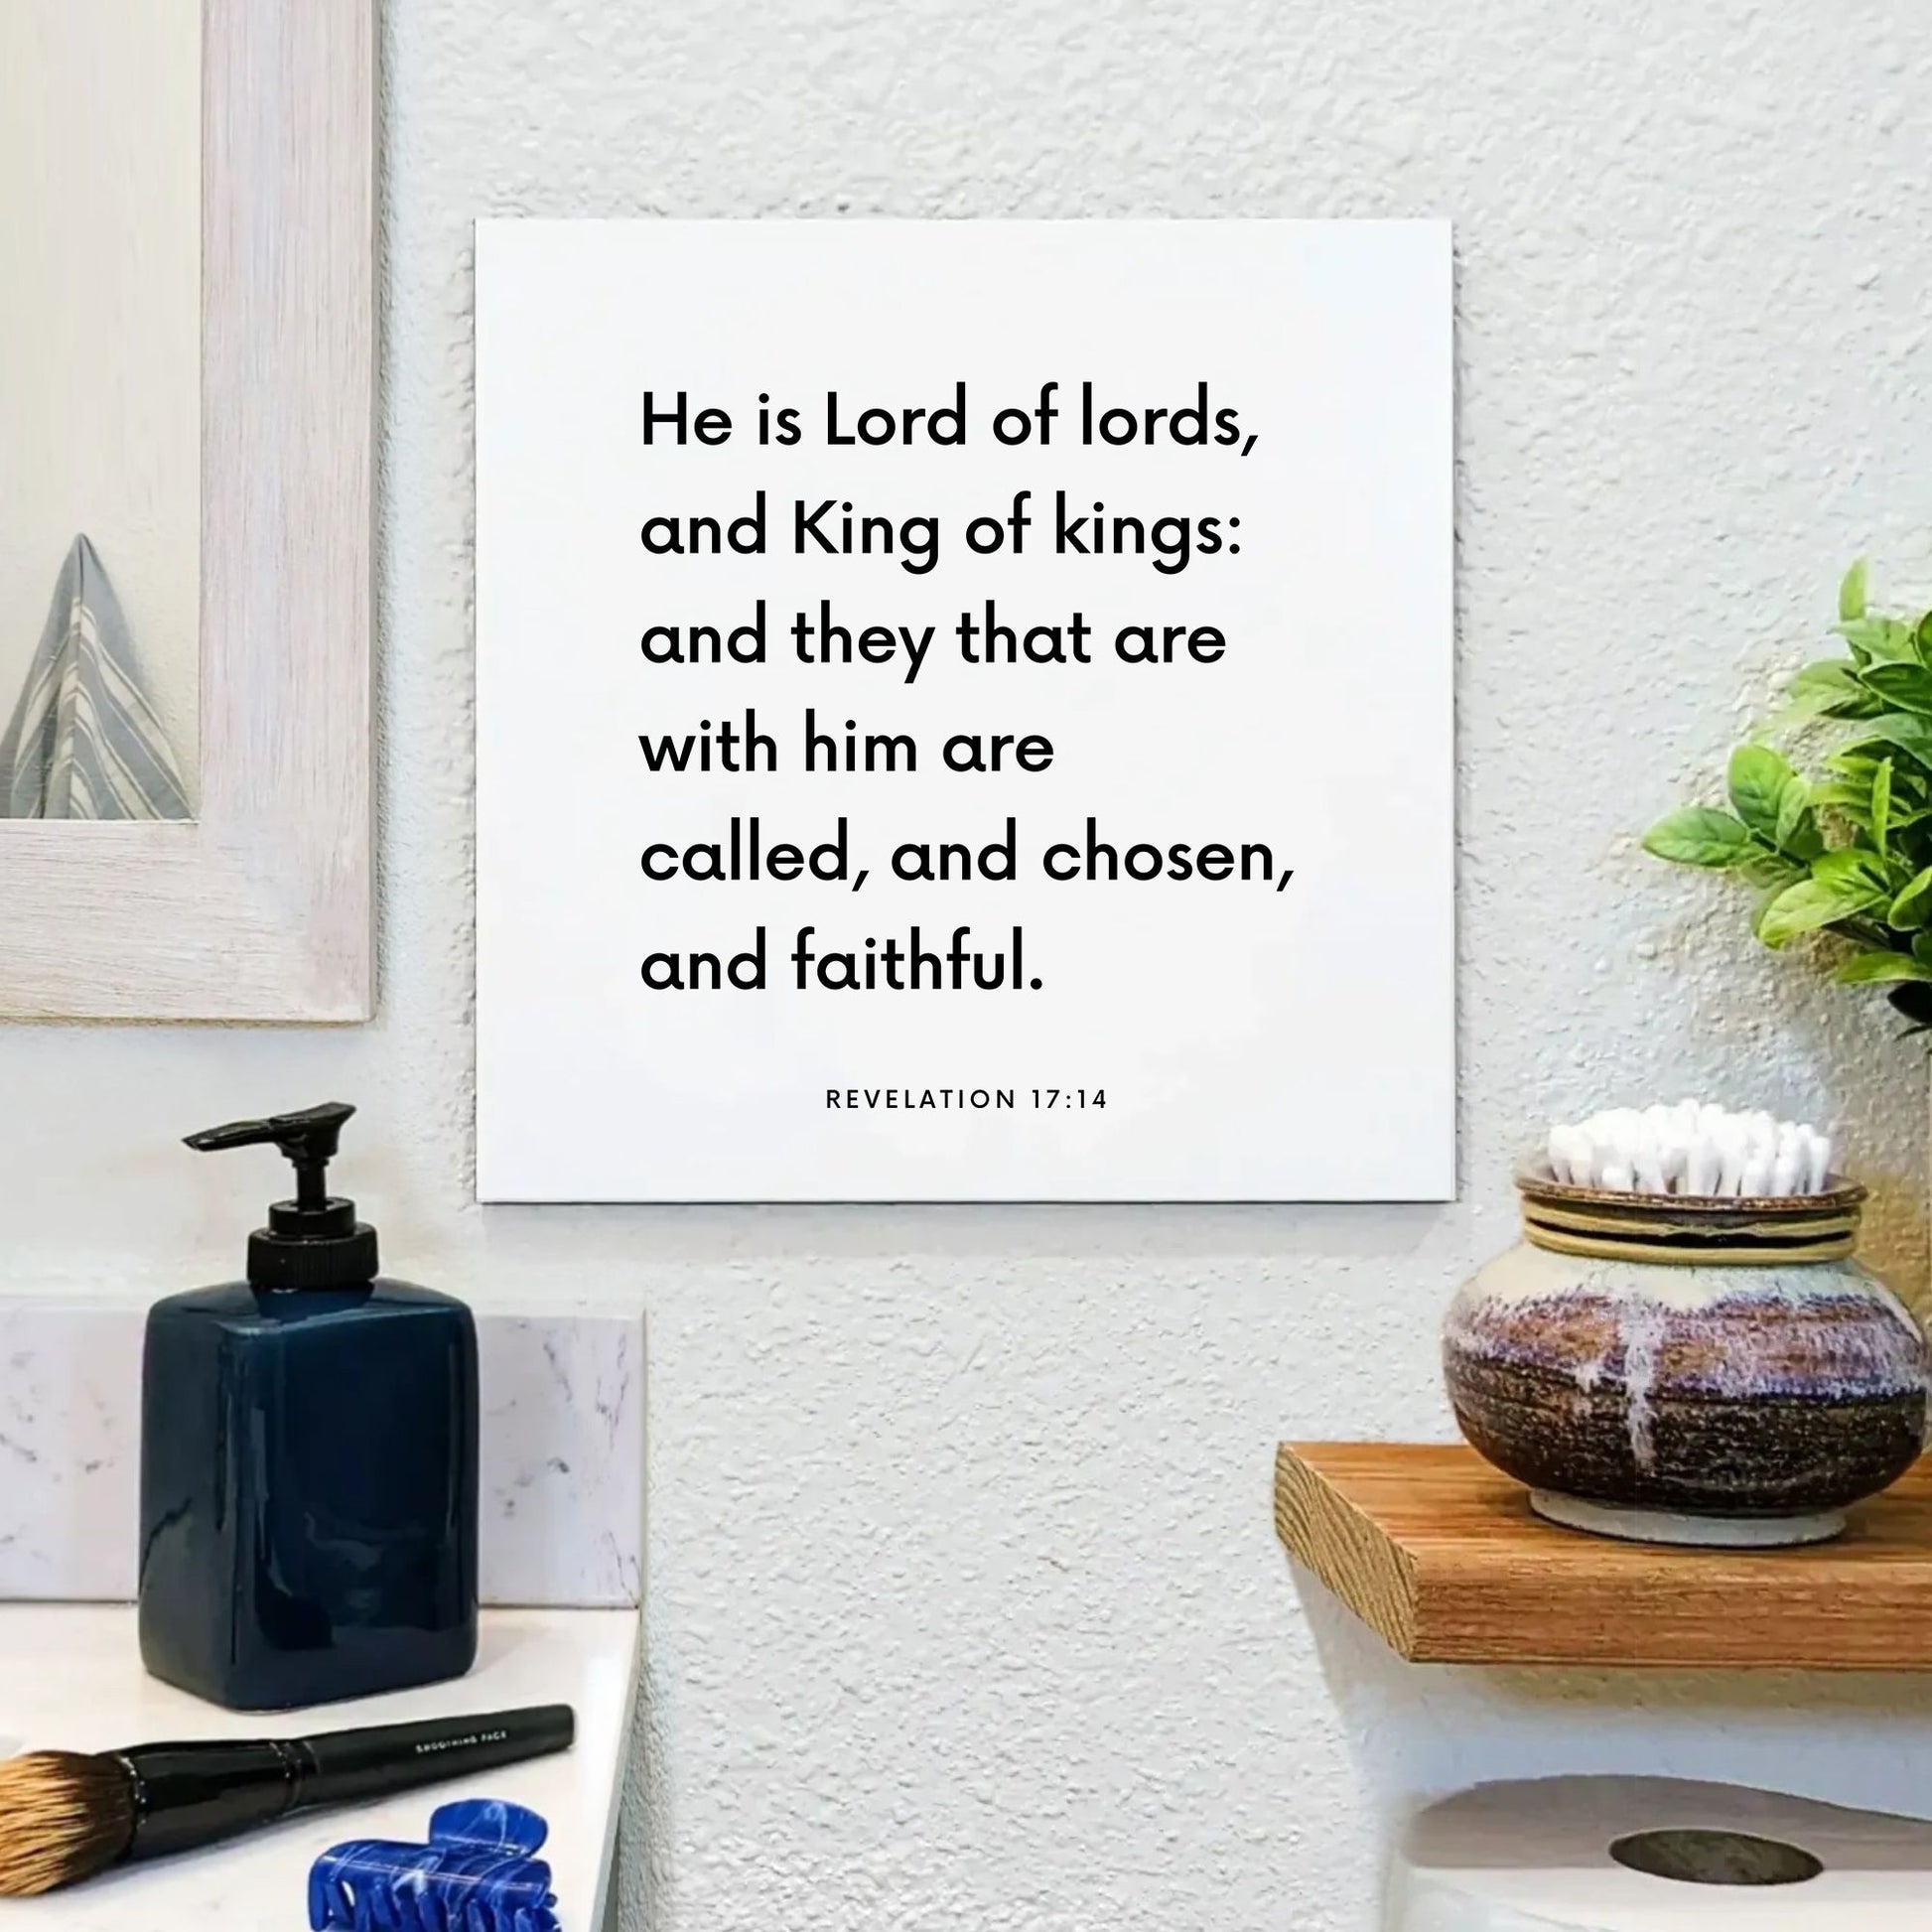 Bathroom mouting of the scripture tile for Revelation 17:14 - "He is Lord of lords, and King of kings"